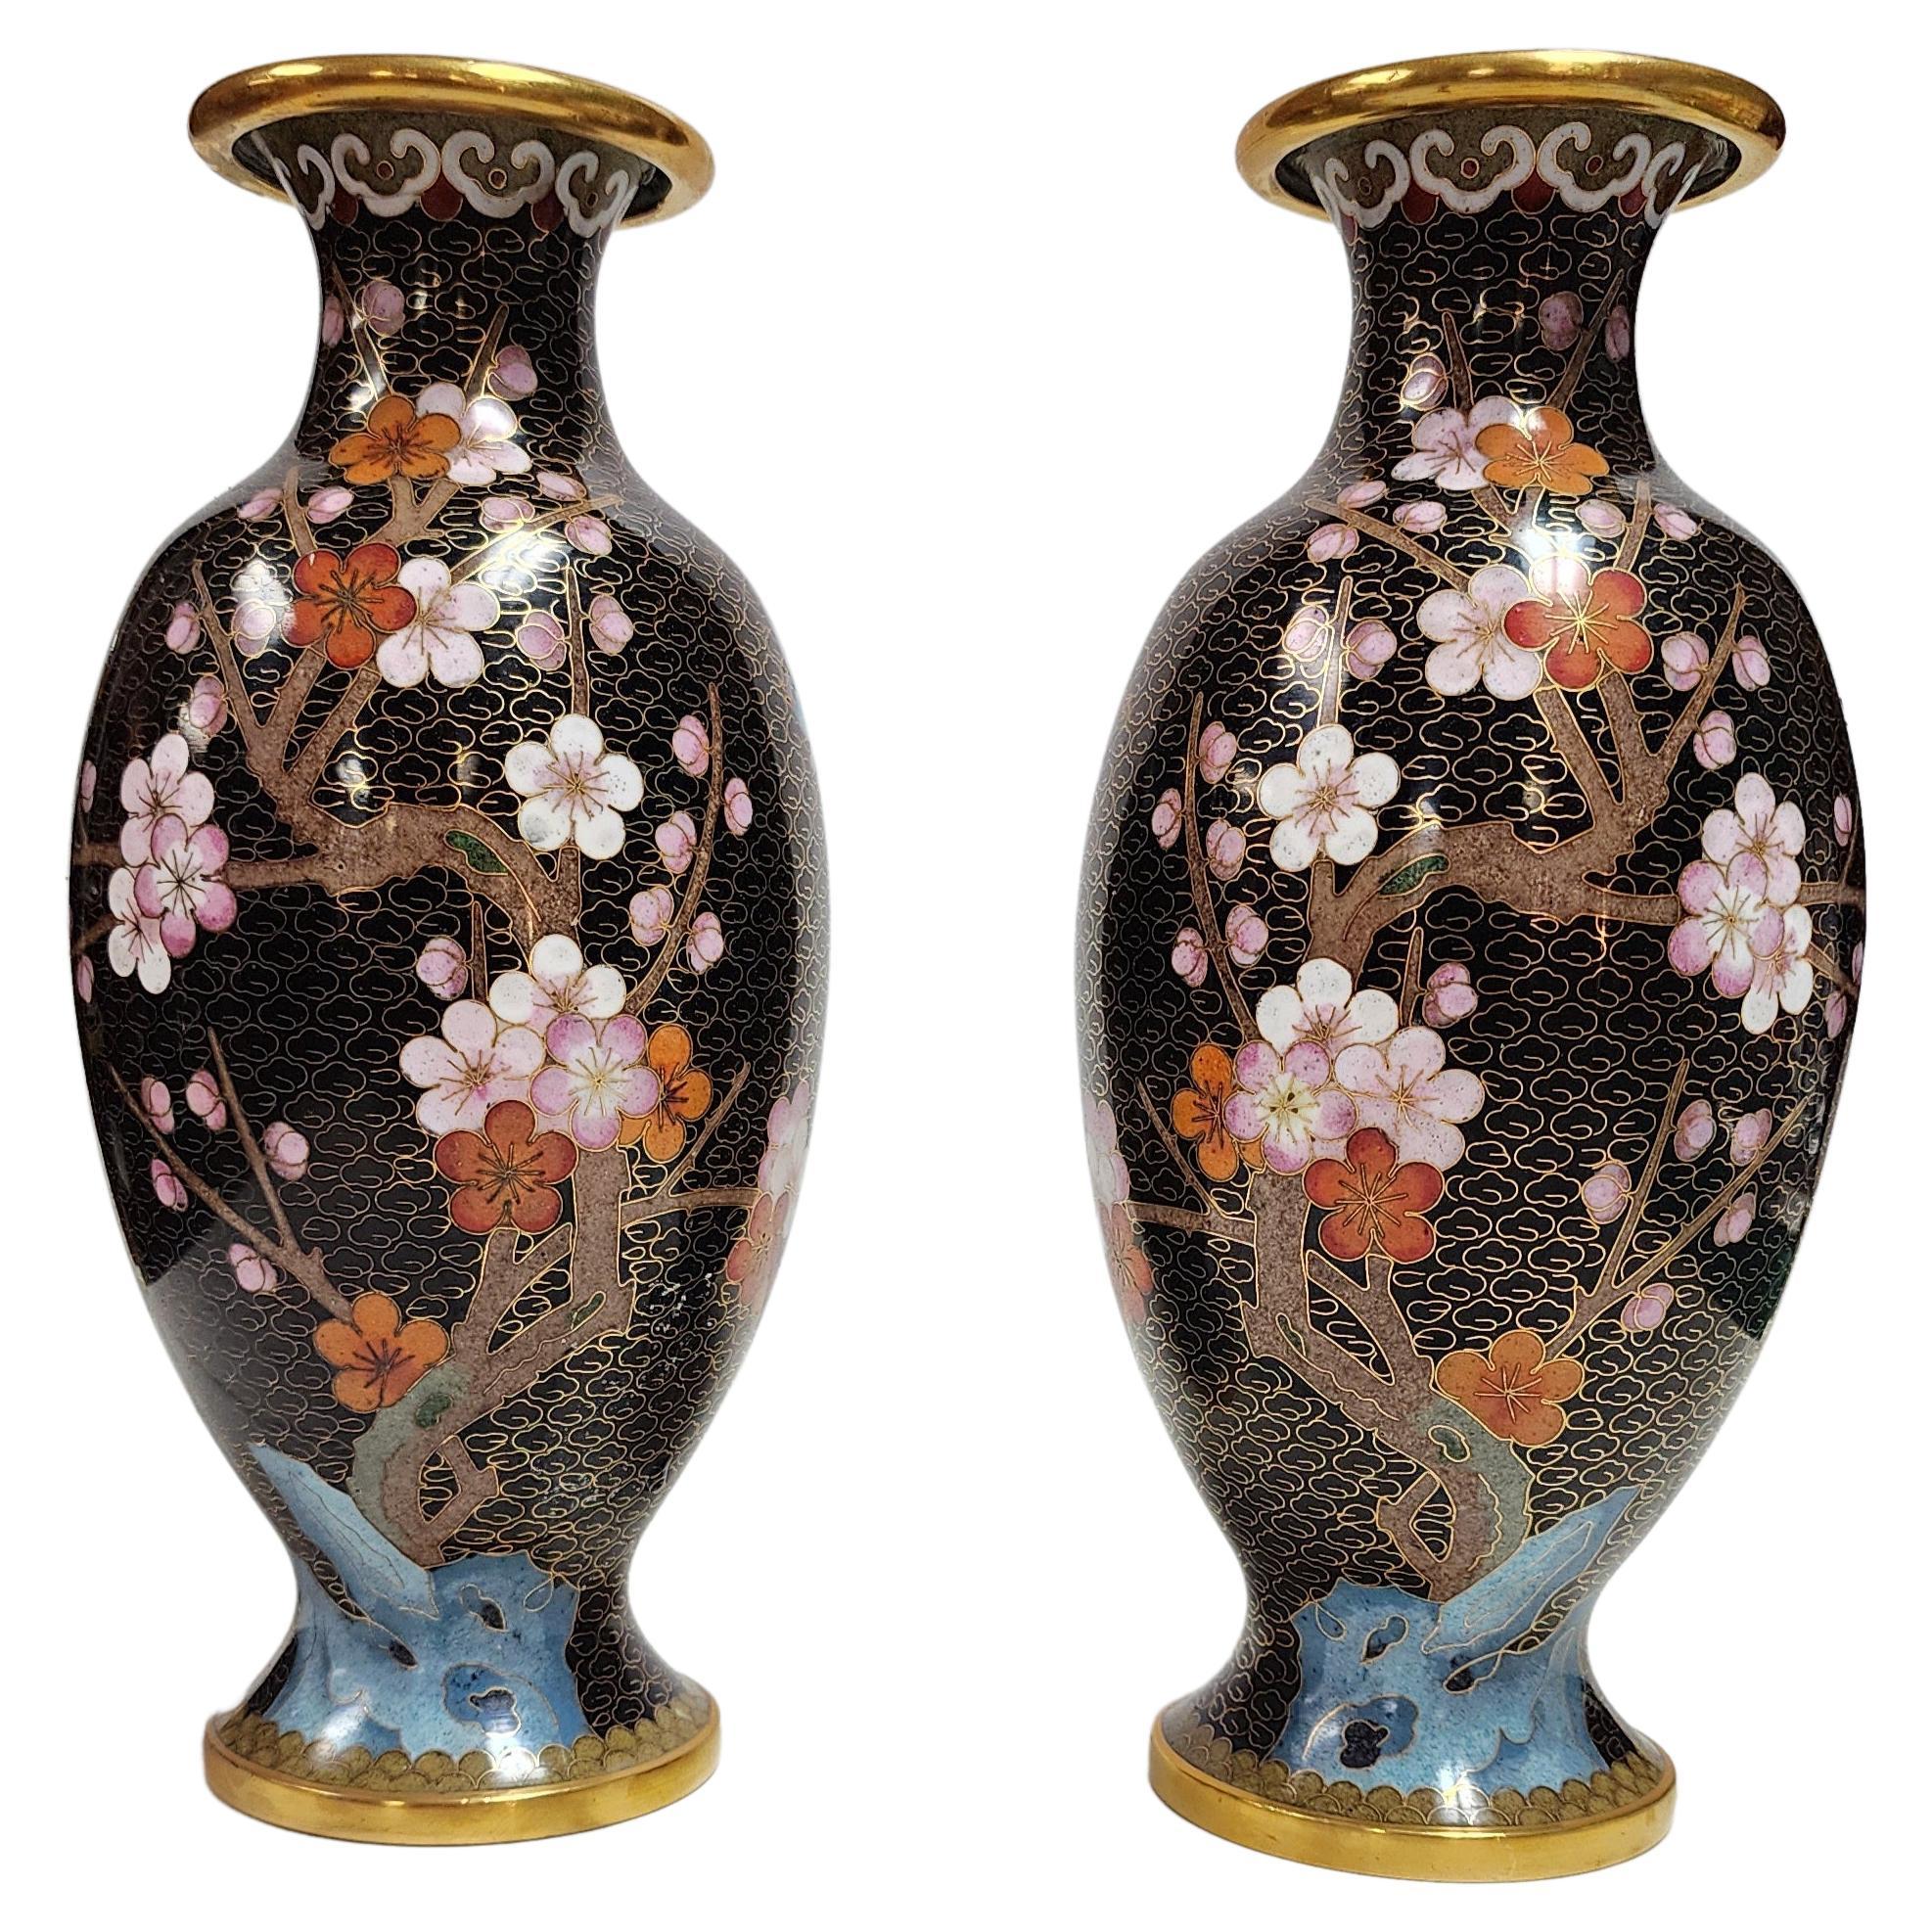 Pair of Mirrored Chinese Cloisonne Enamel Vase with Flower and Bird Motif